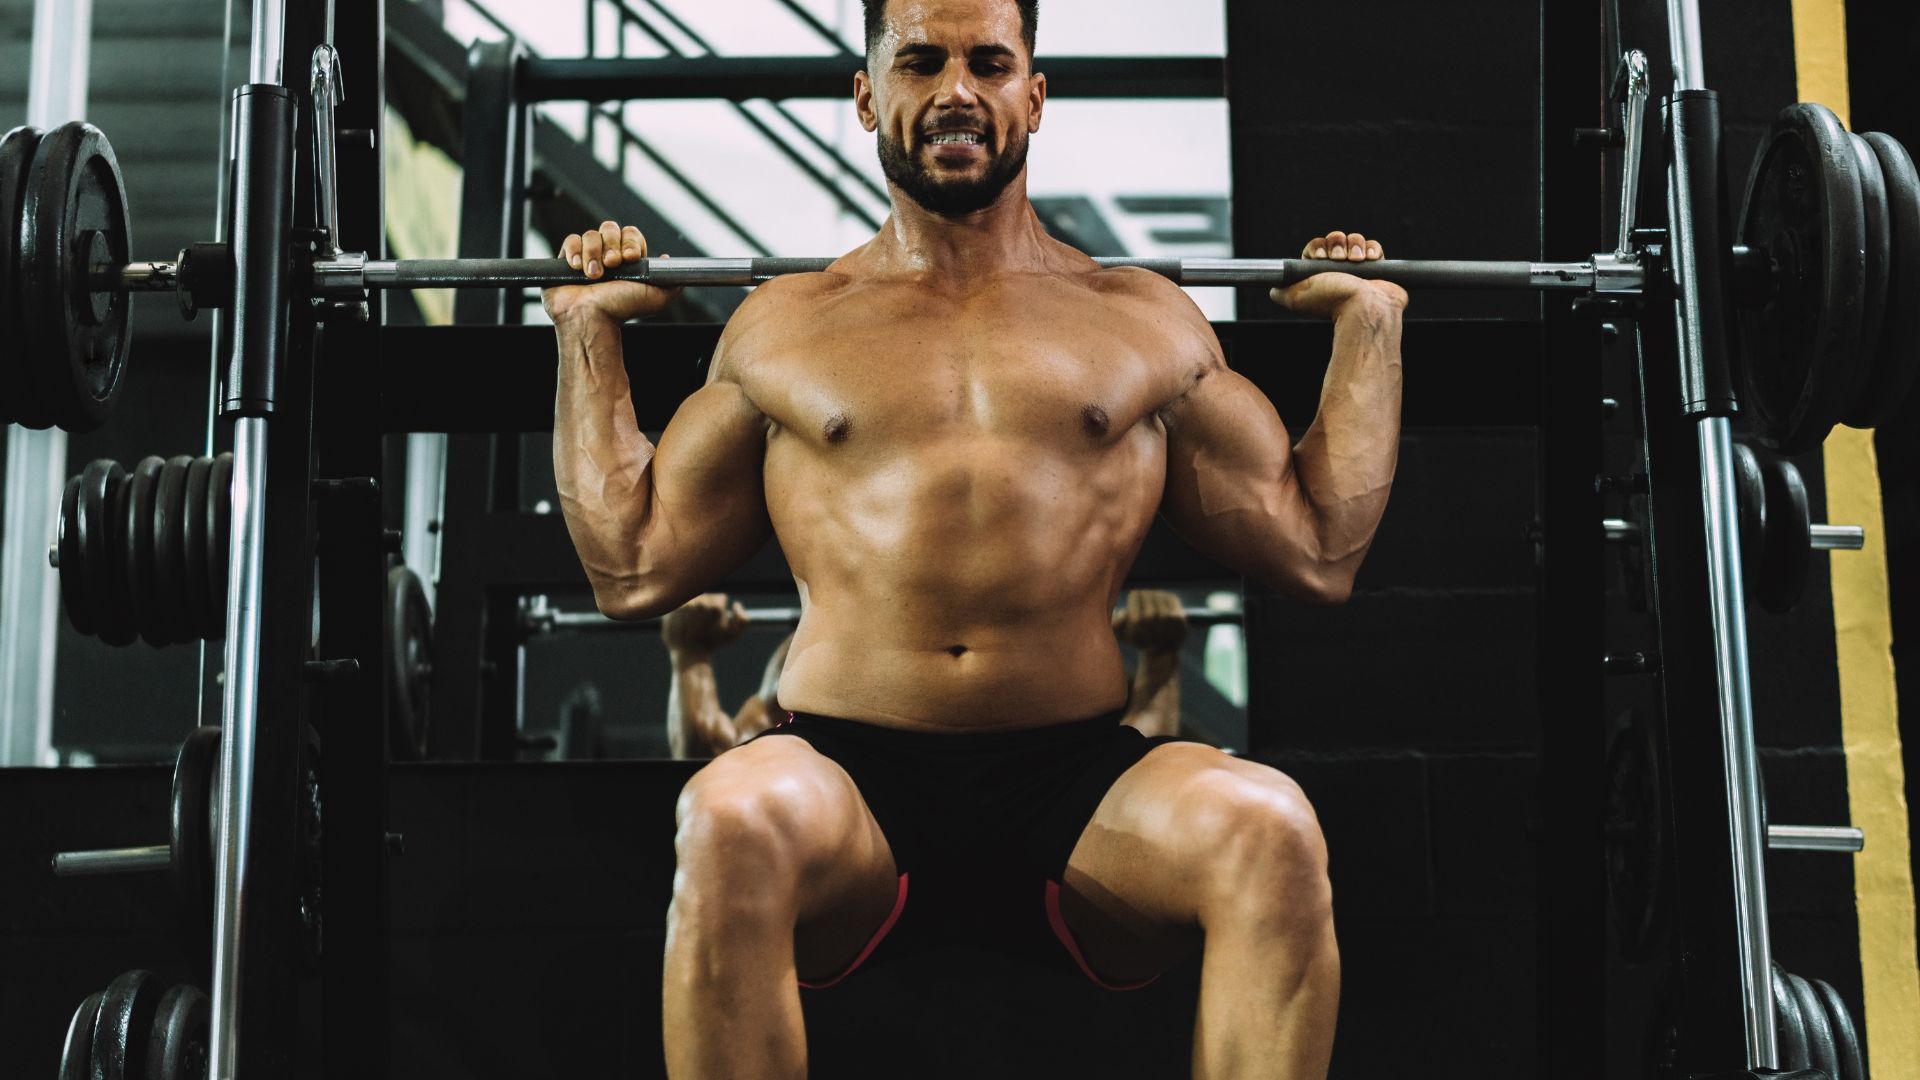 Portrait of a strongman squatting with weights in a gym